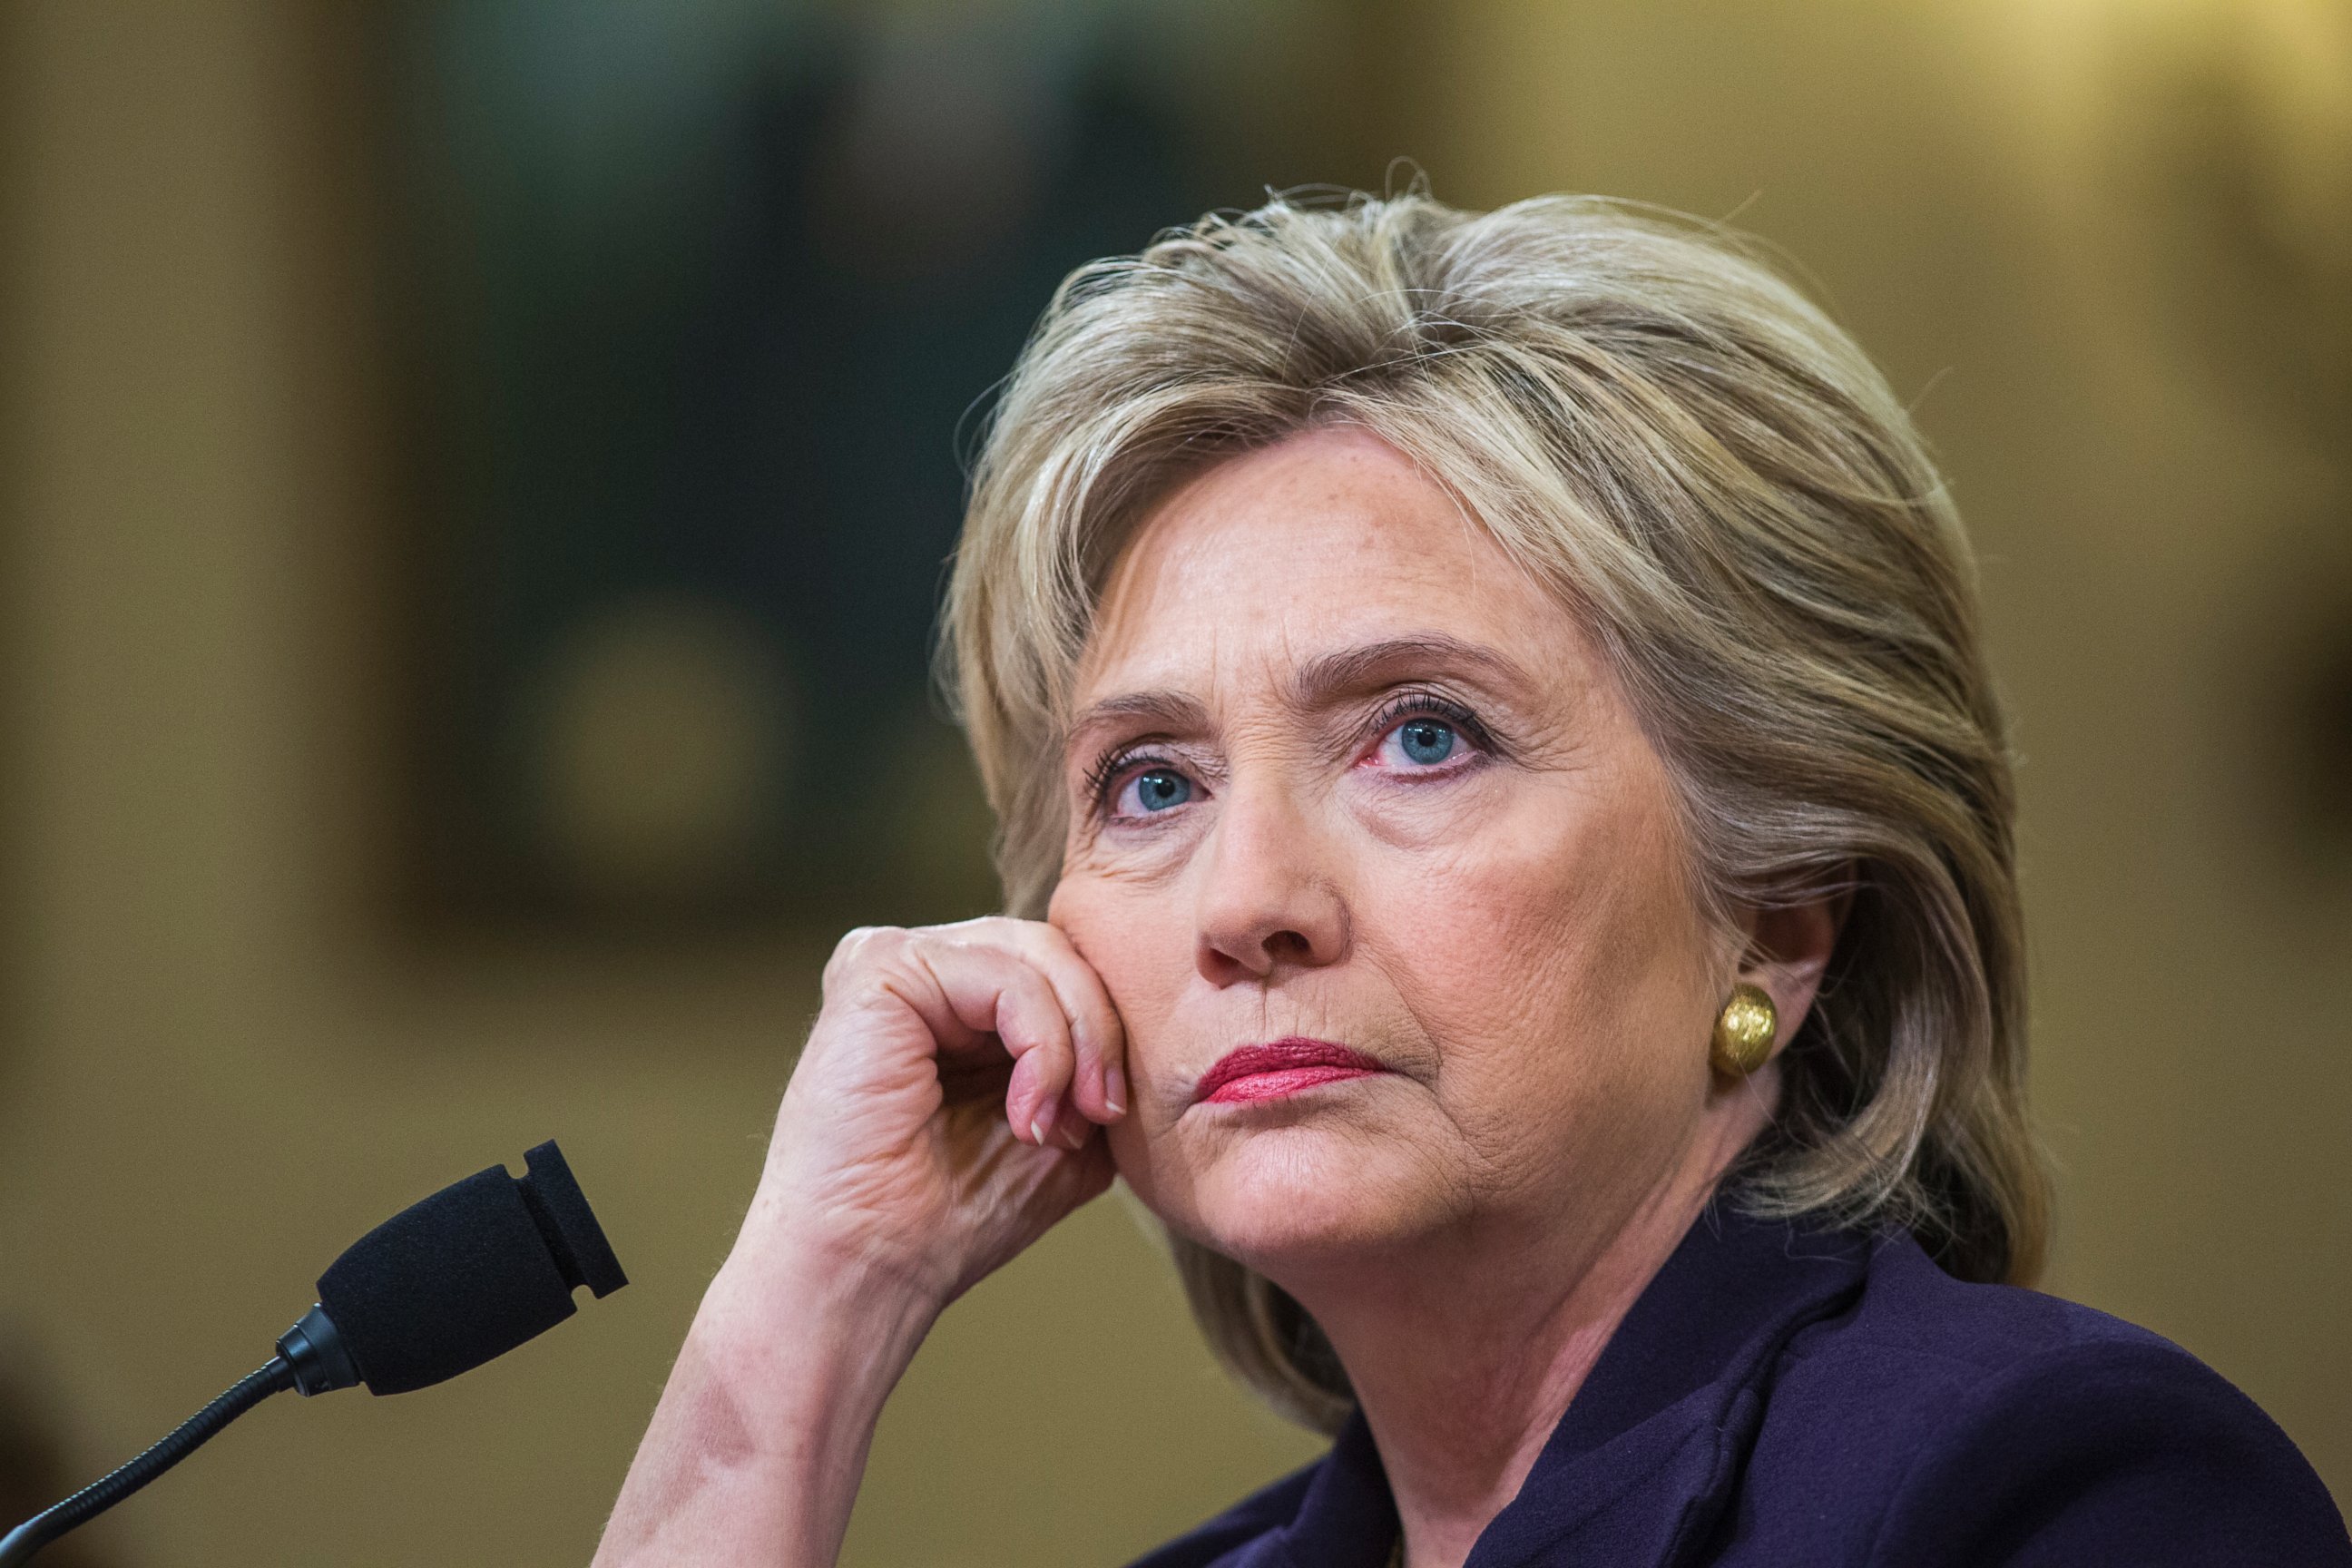 PHOTO: Former Secretary of State and Democratic presidential candidate Hillary Clinton testifies before the House Select Committee on Benghazi, on Capitol Hill in Washington D.C., Oct. 22, 2015.